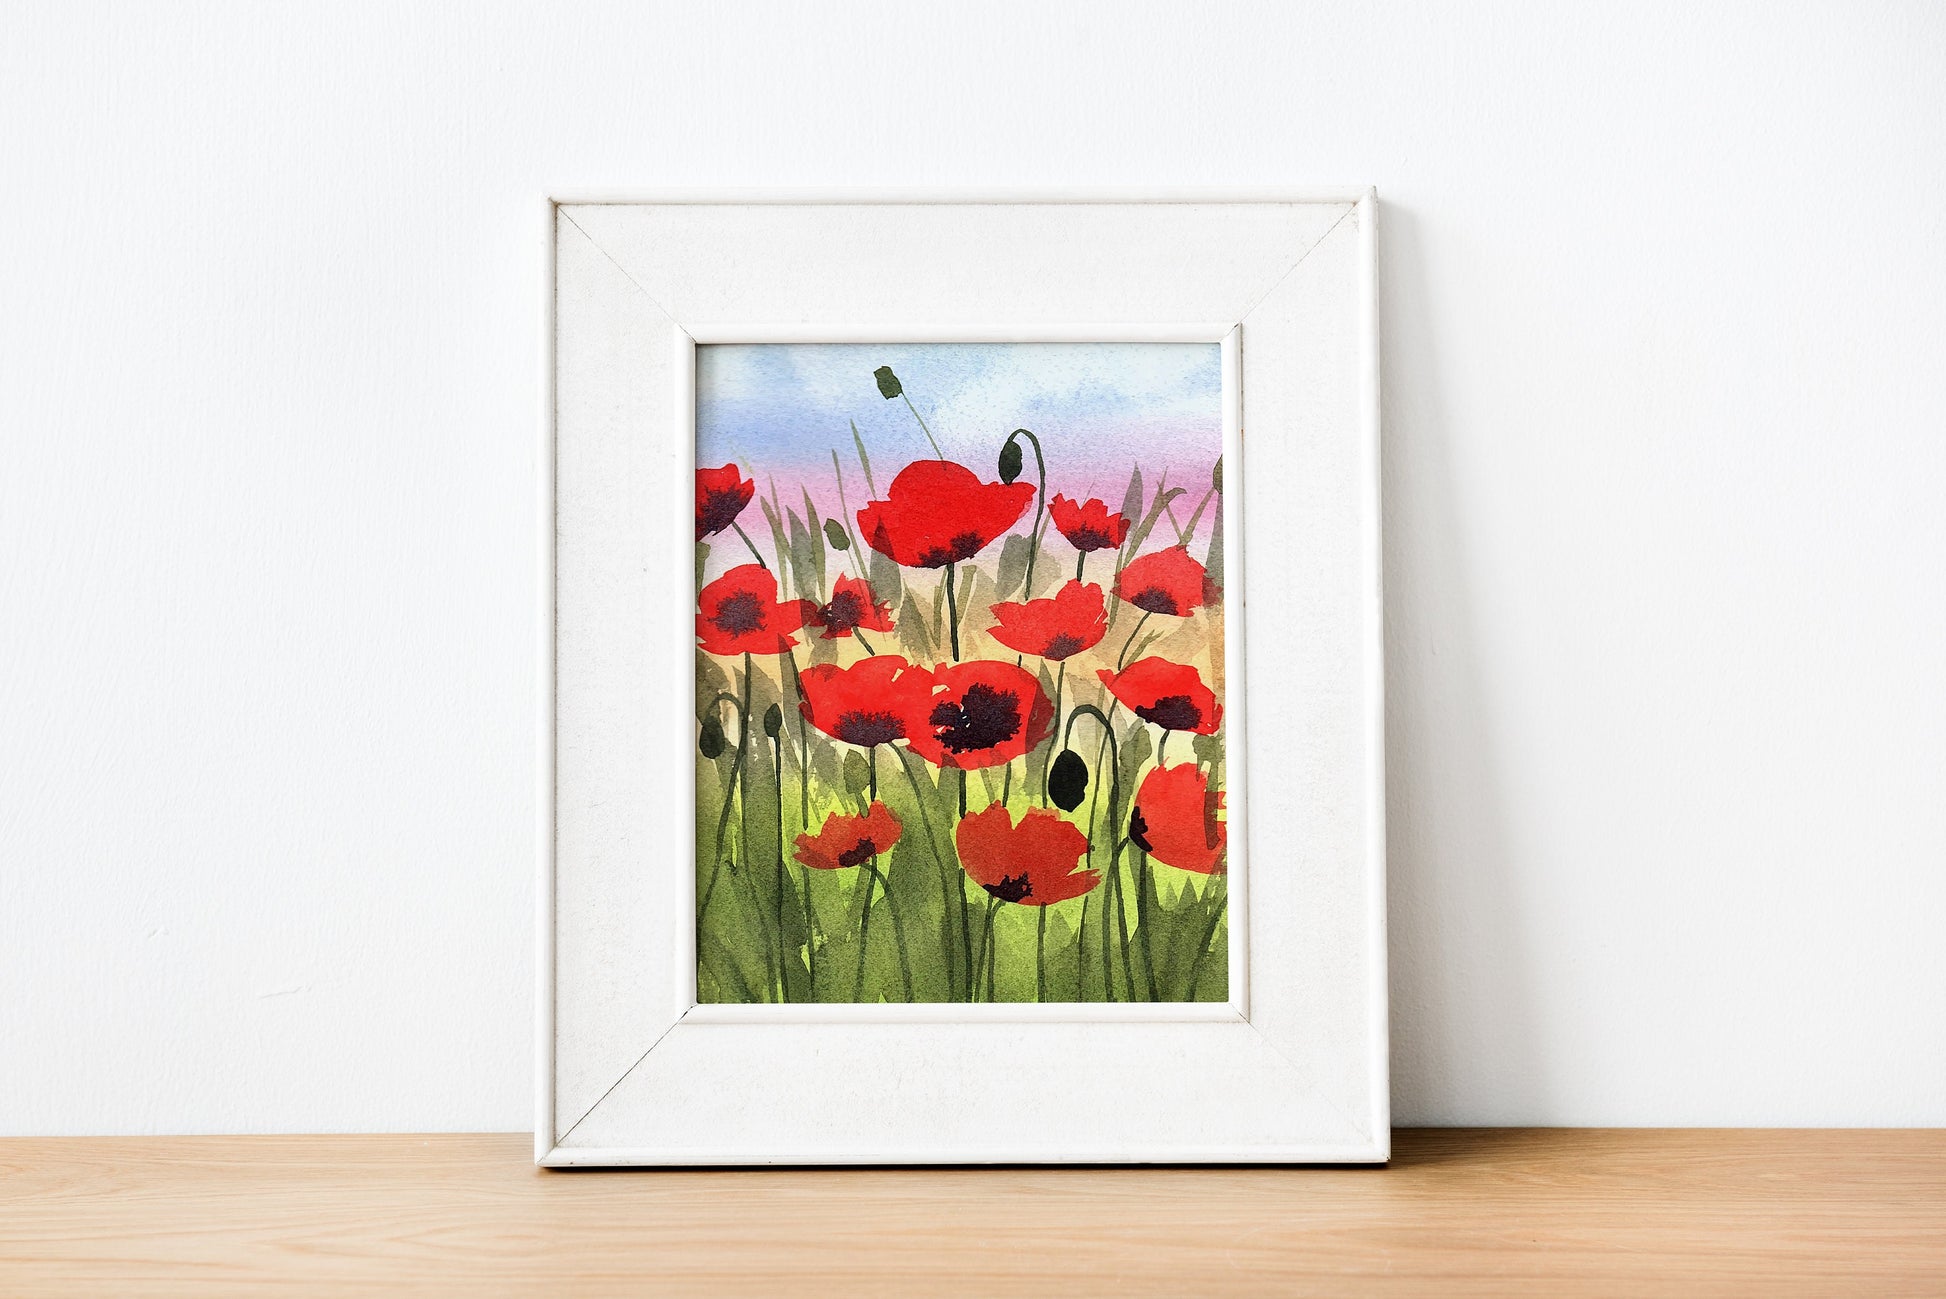 Poppies at Sunset - Reproduction, Fine Art Print, Giclee Print, Floral Landscape, Red Poppies, Flowers